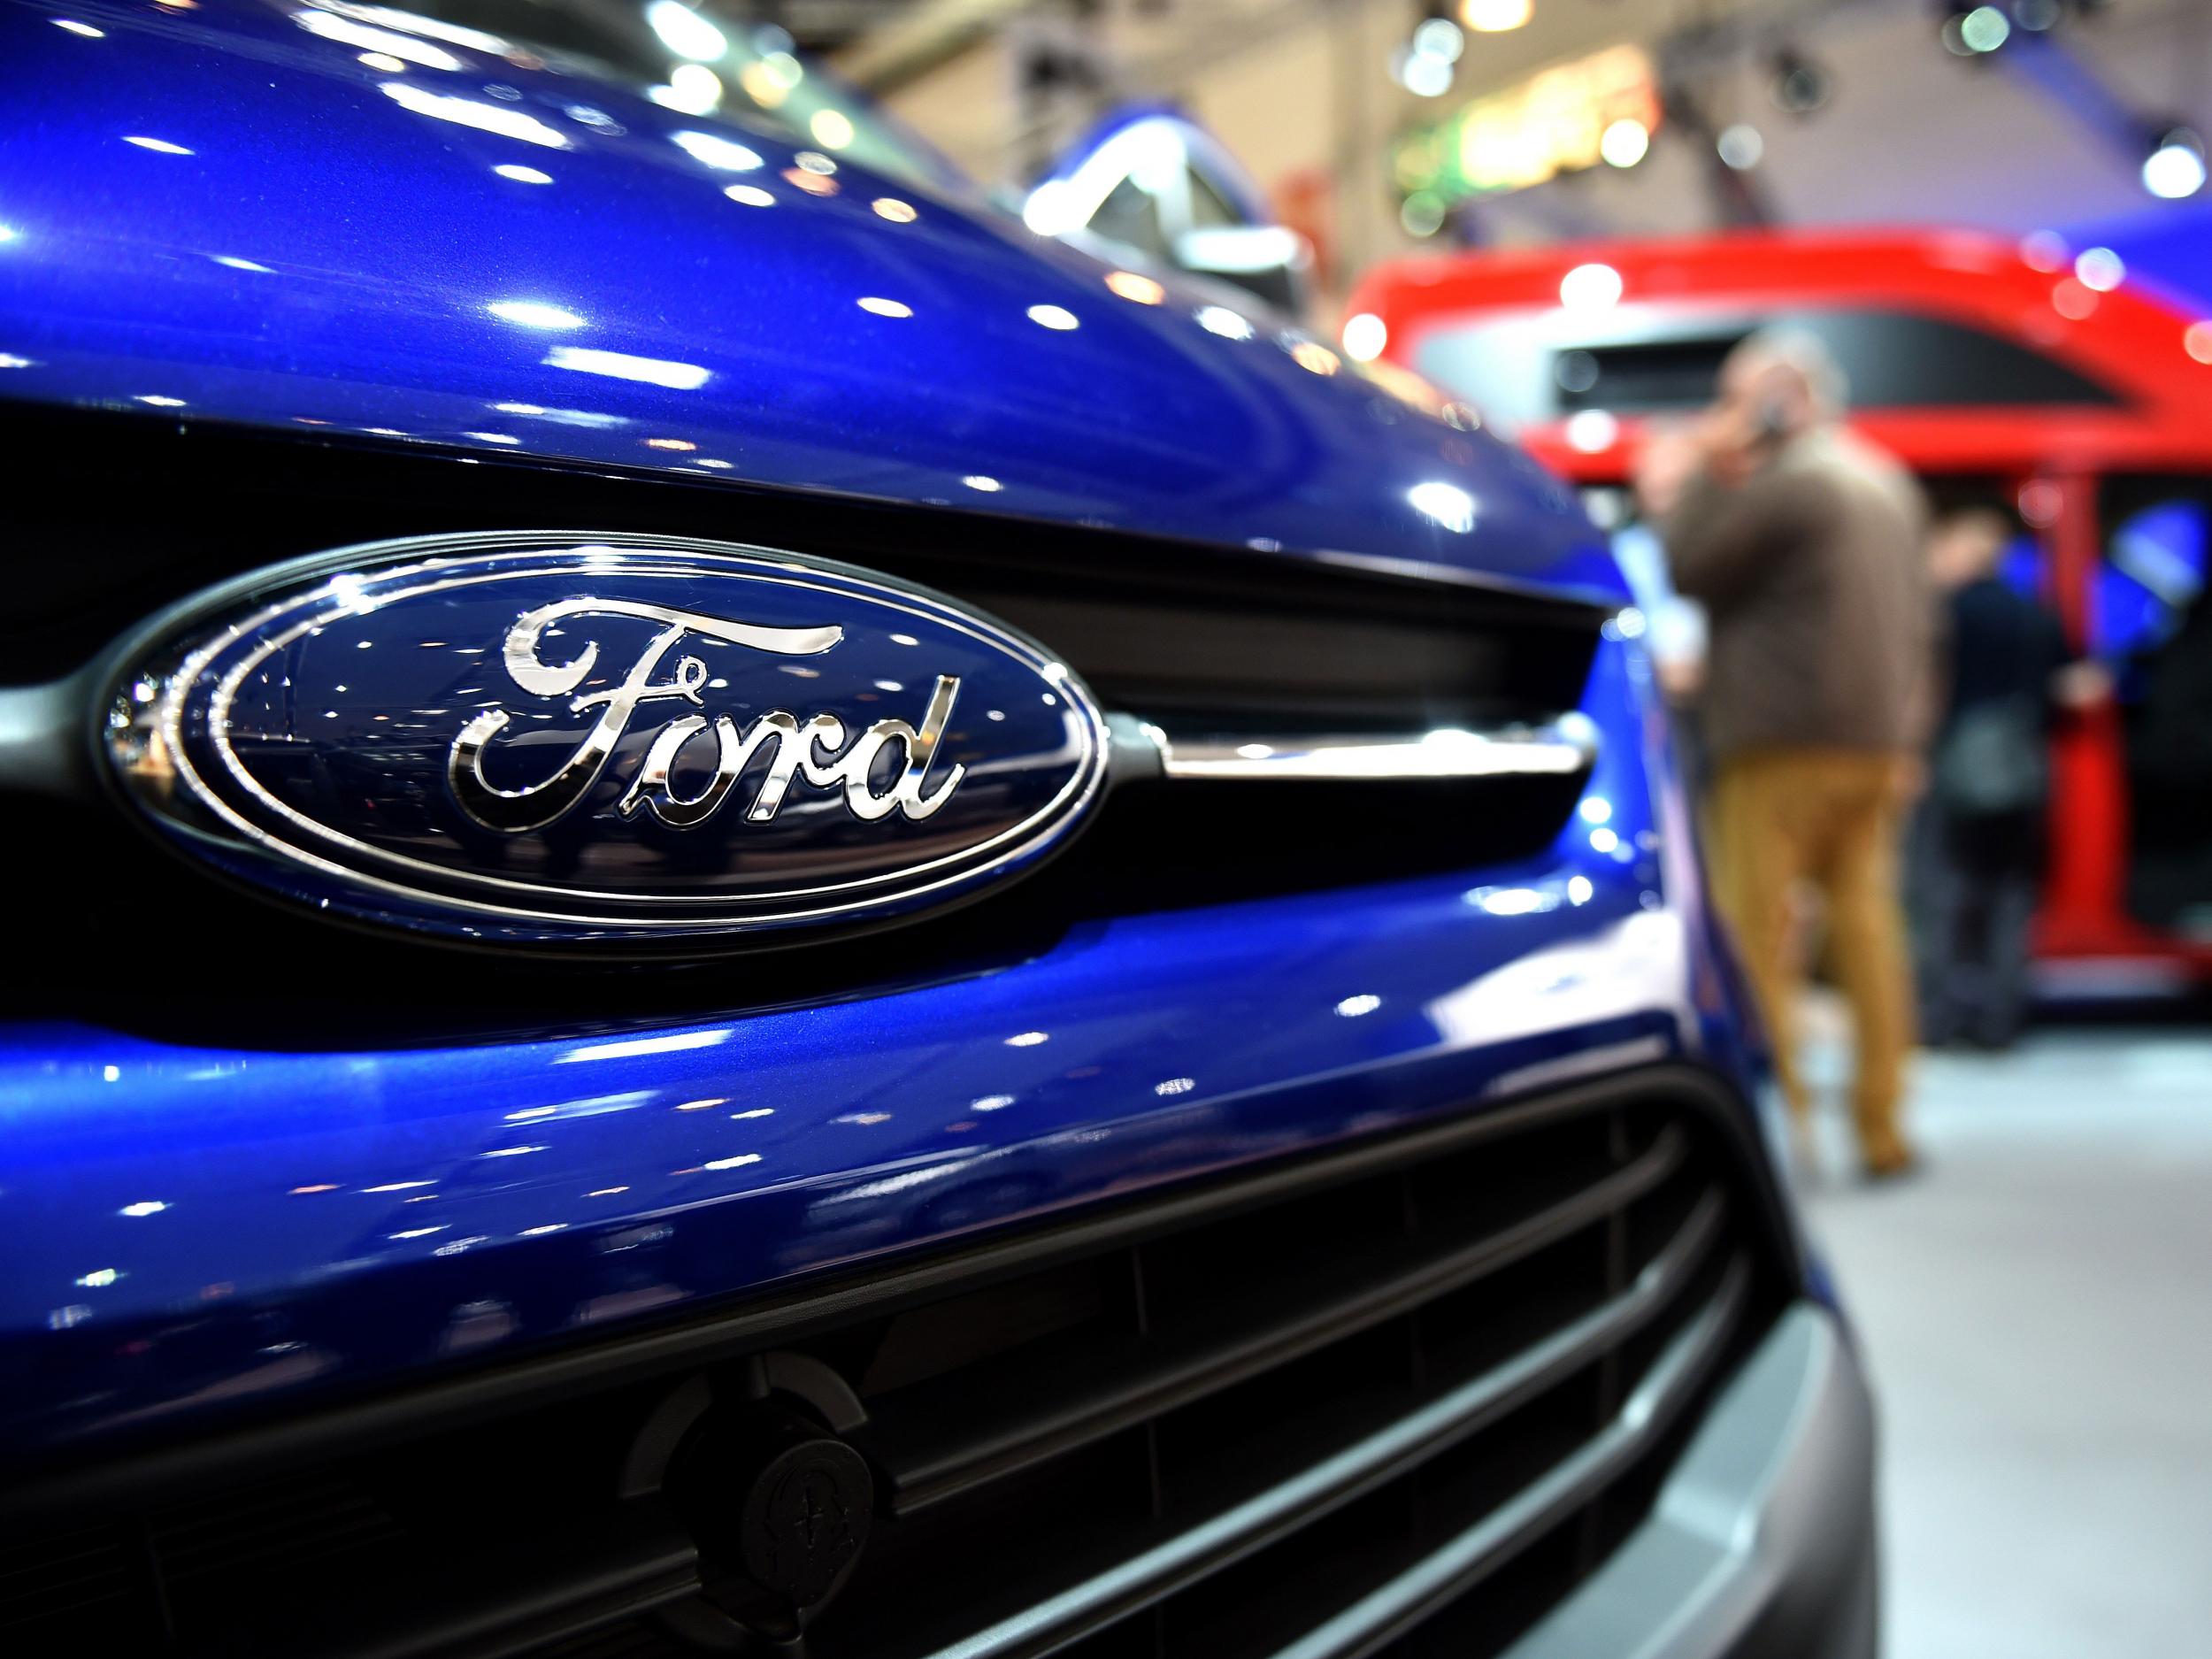 A Caravan of US car maker Ford is on display at the expo 'Caravan Salon Duesseldorf' at the fair grounds in Duesseldorf, western Germany, on September 3, 2015